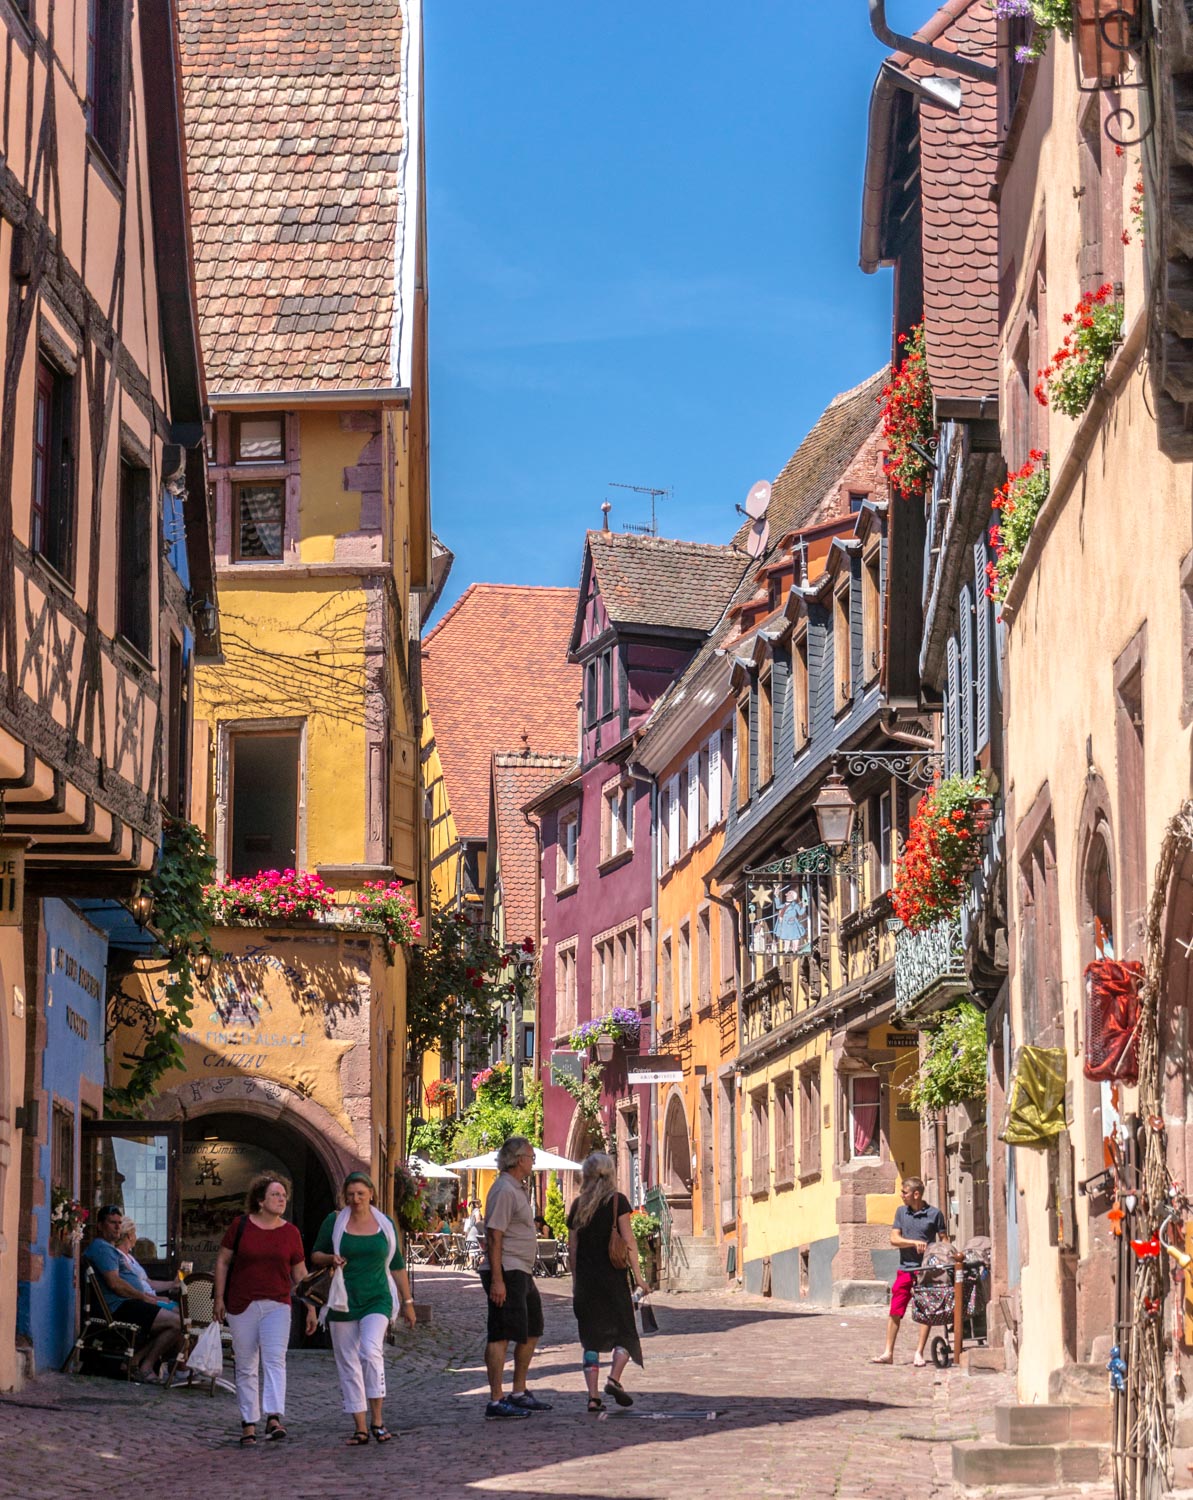 A month in France – Riquewihr